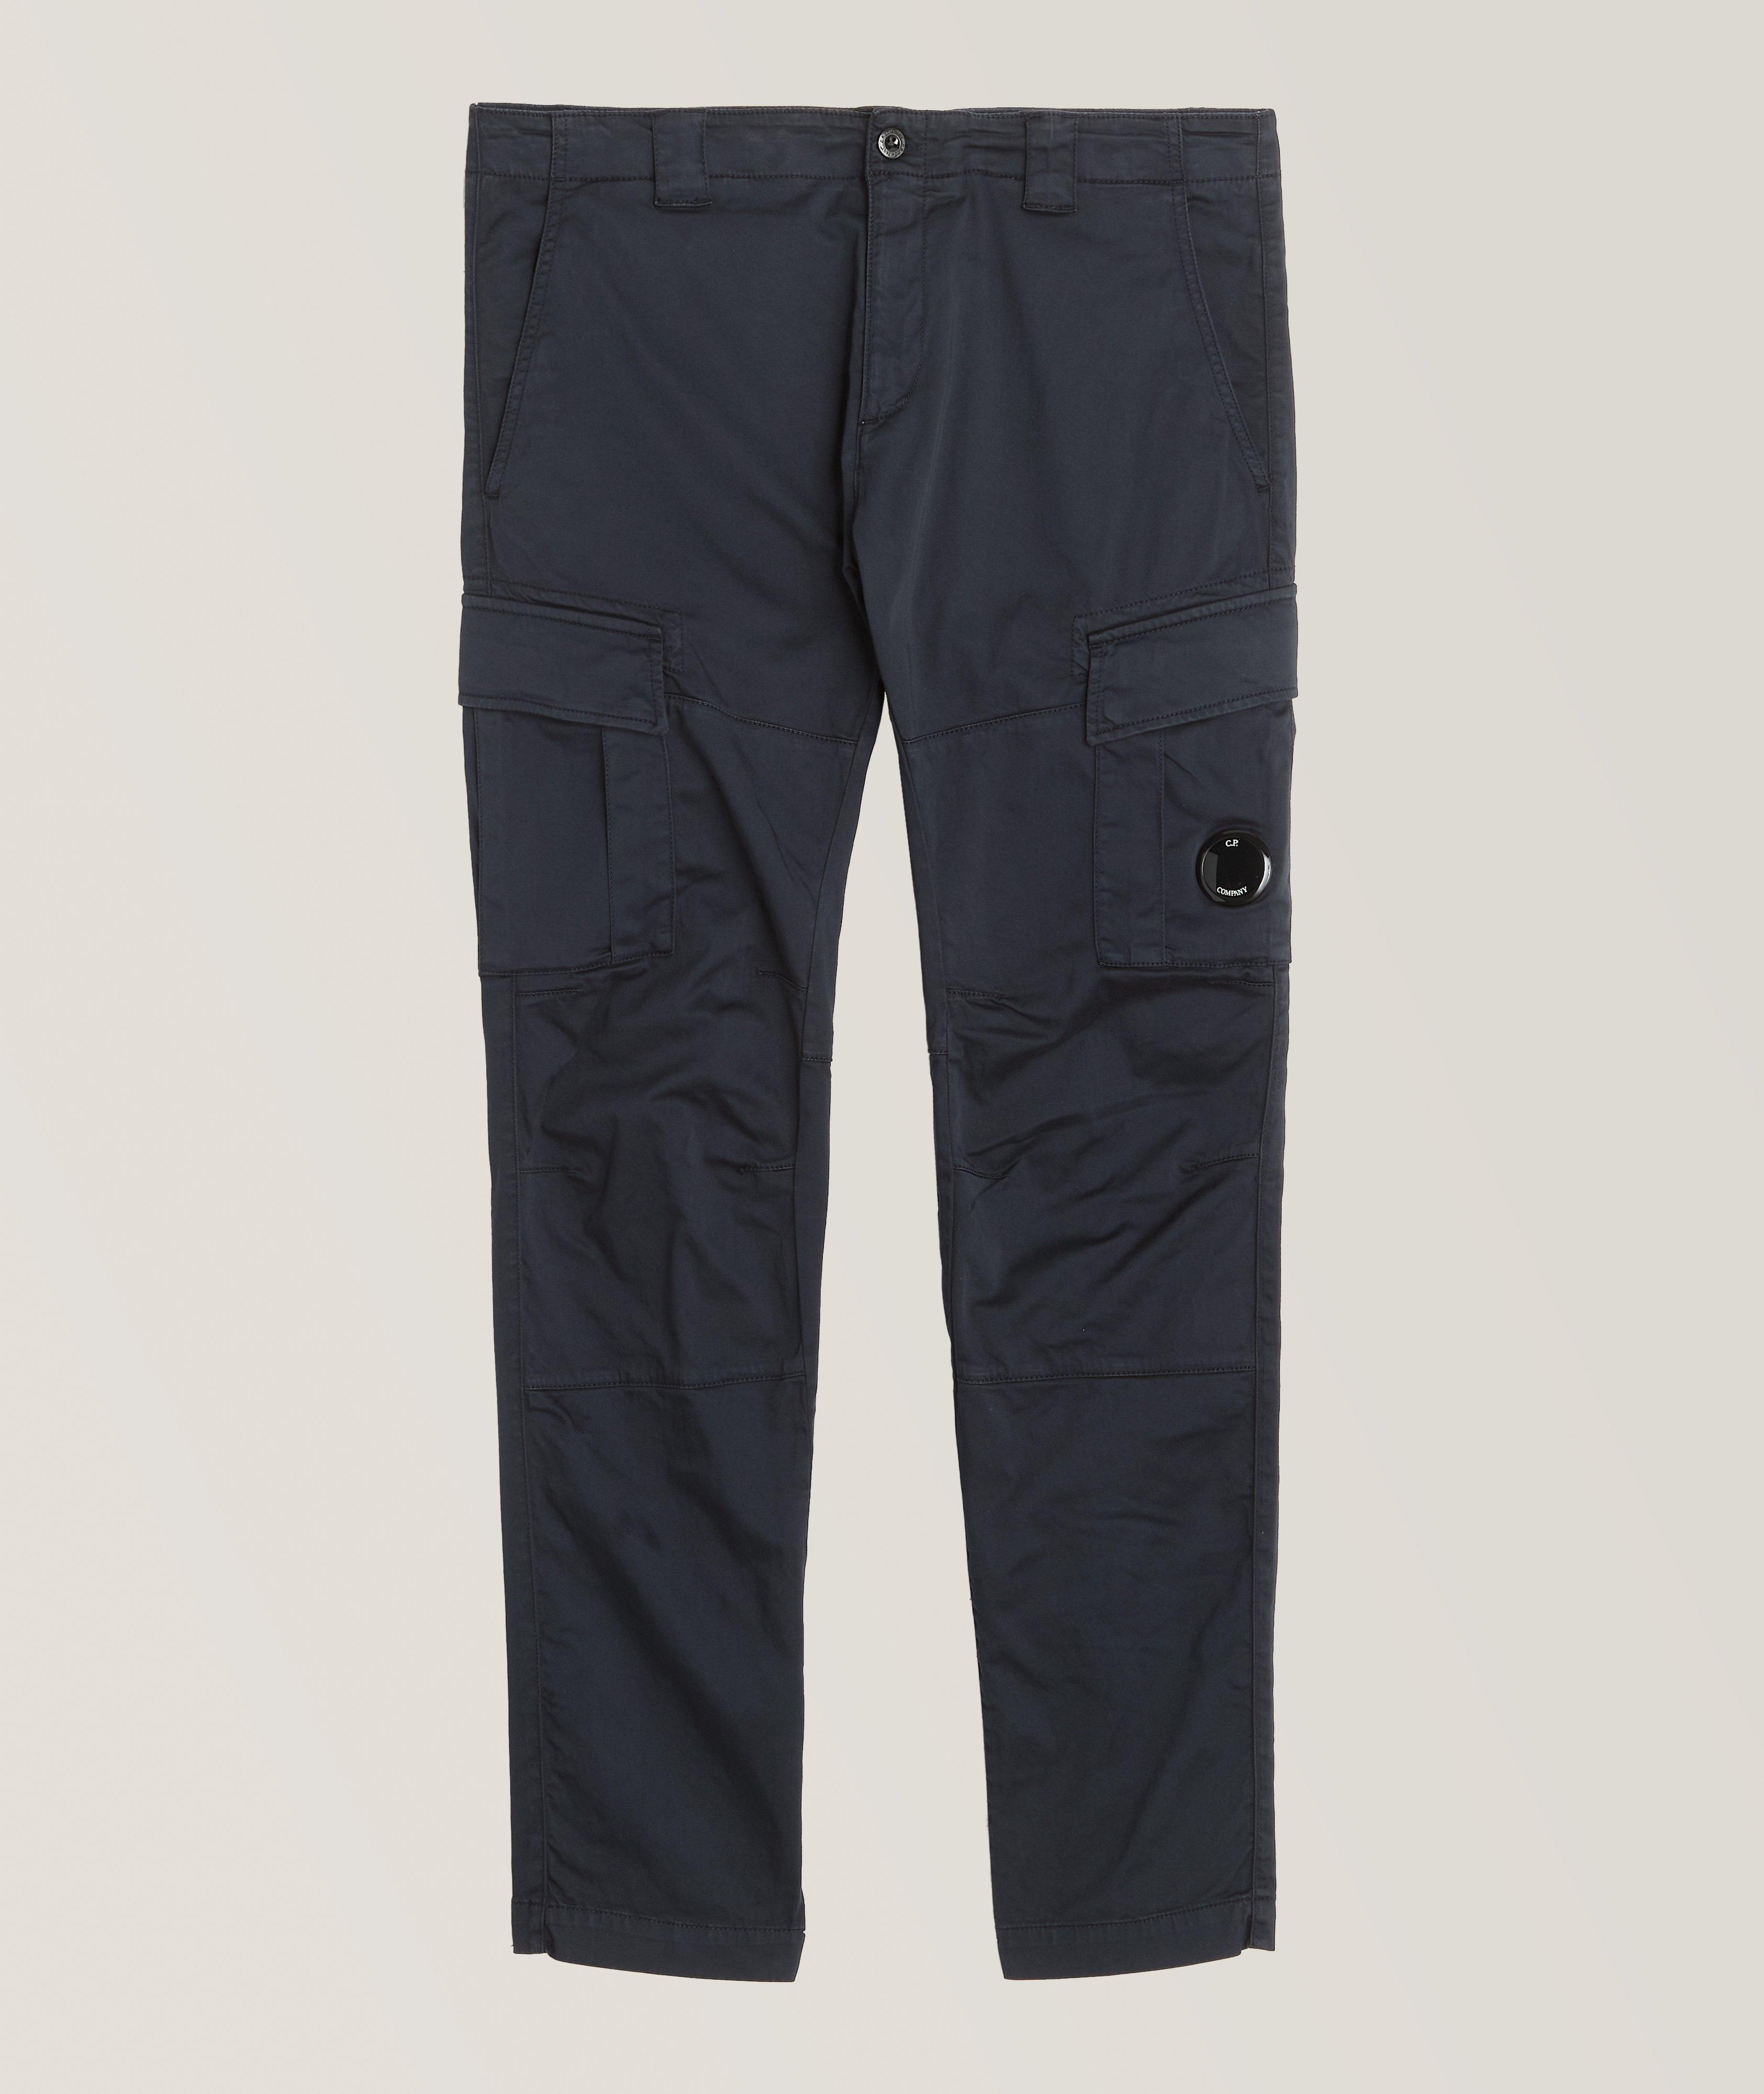 Stretch-Sateen Cargo Pants image 0